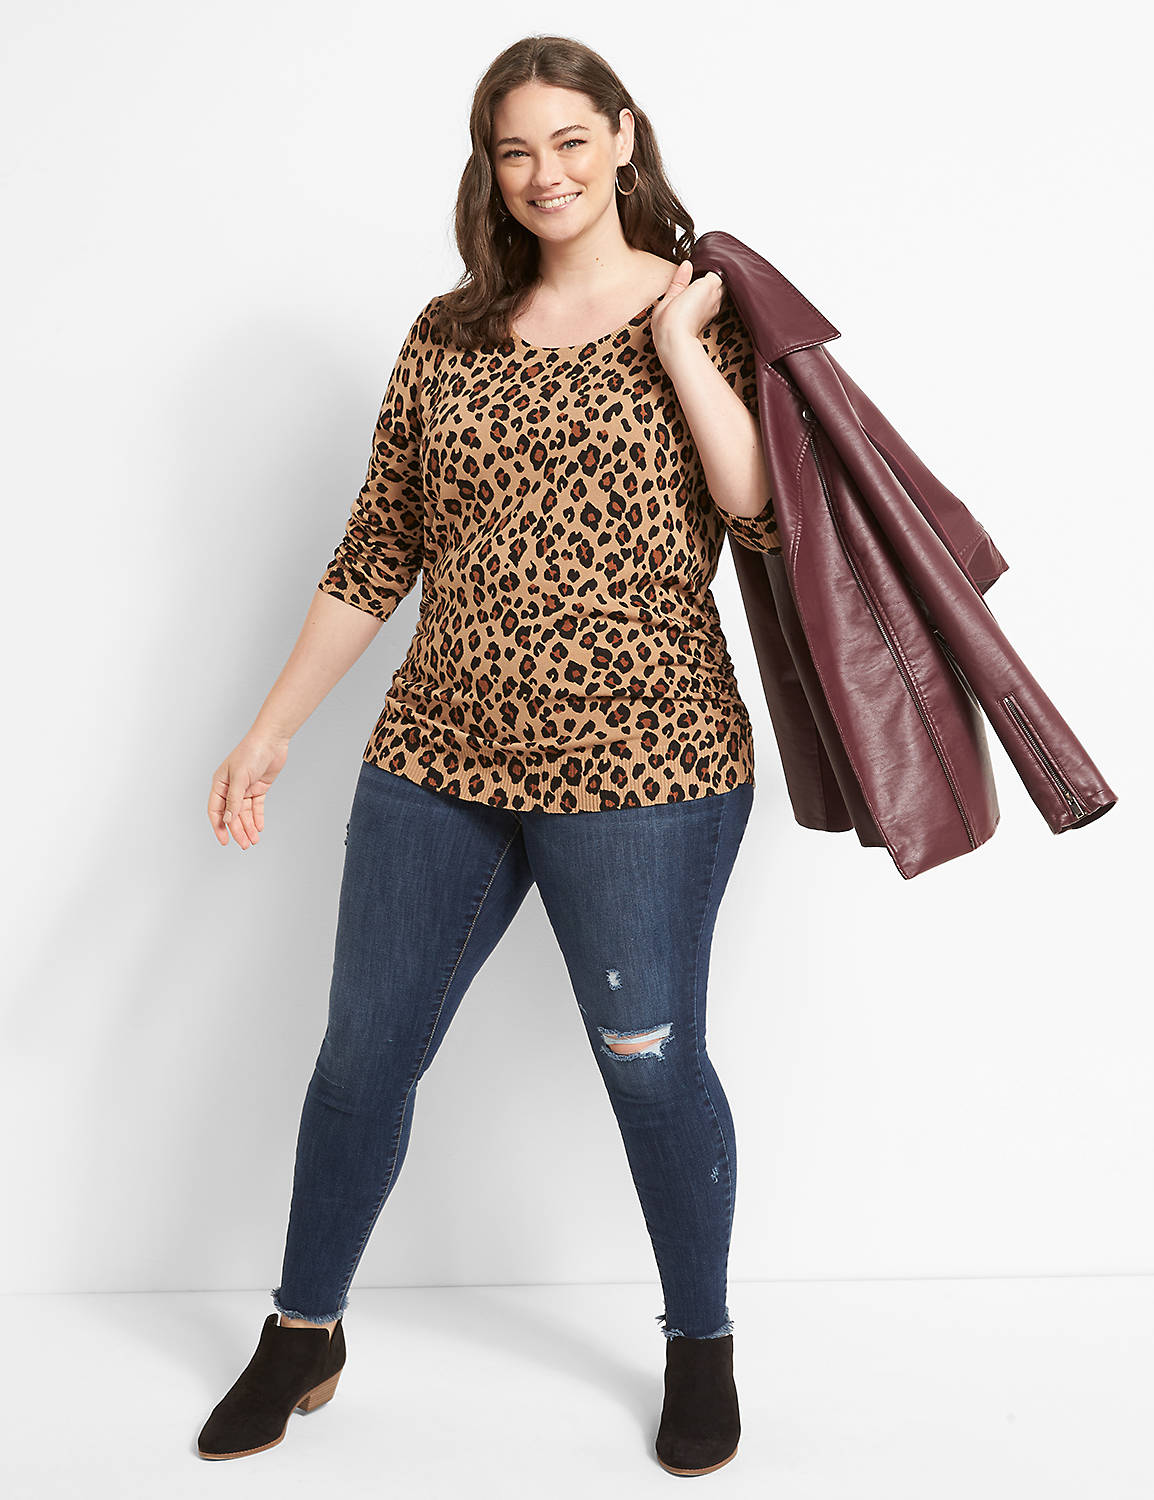 Ruched-Side Sweater - Leopard Product Image 3